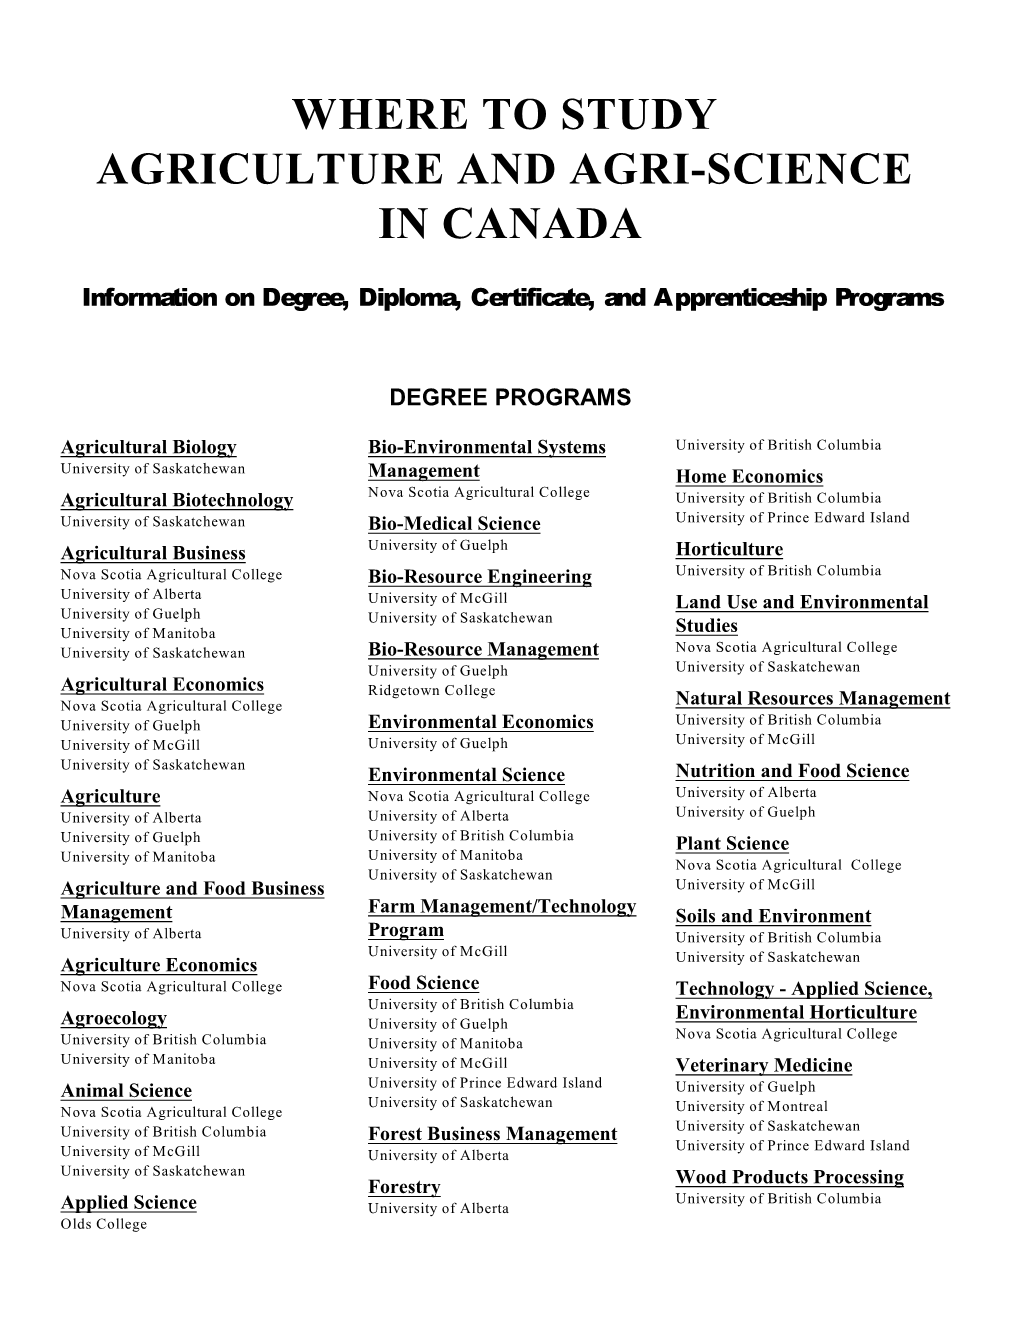 Where to Study Agriculture and Agri-Science in Canada